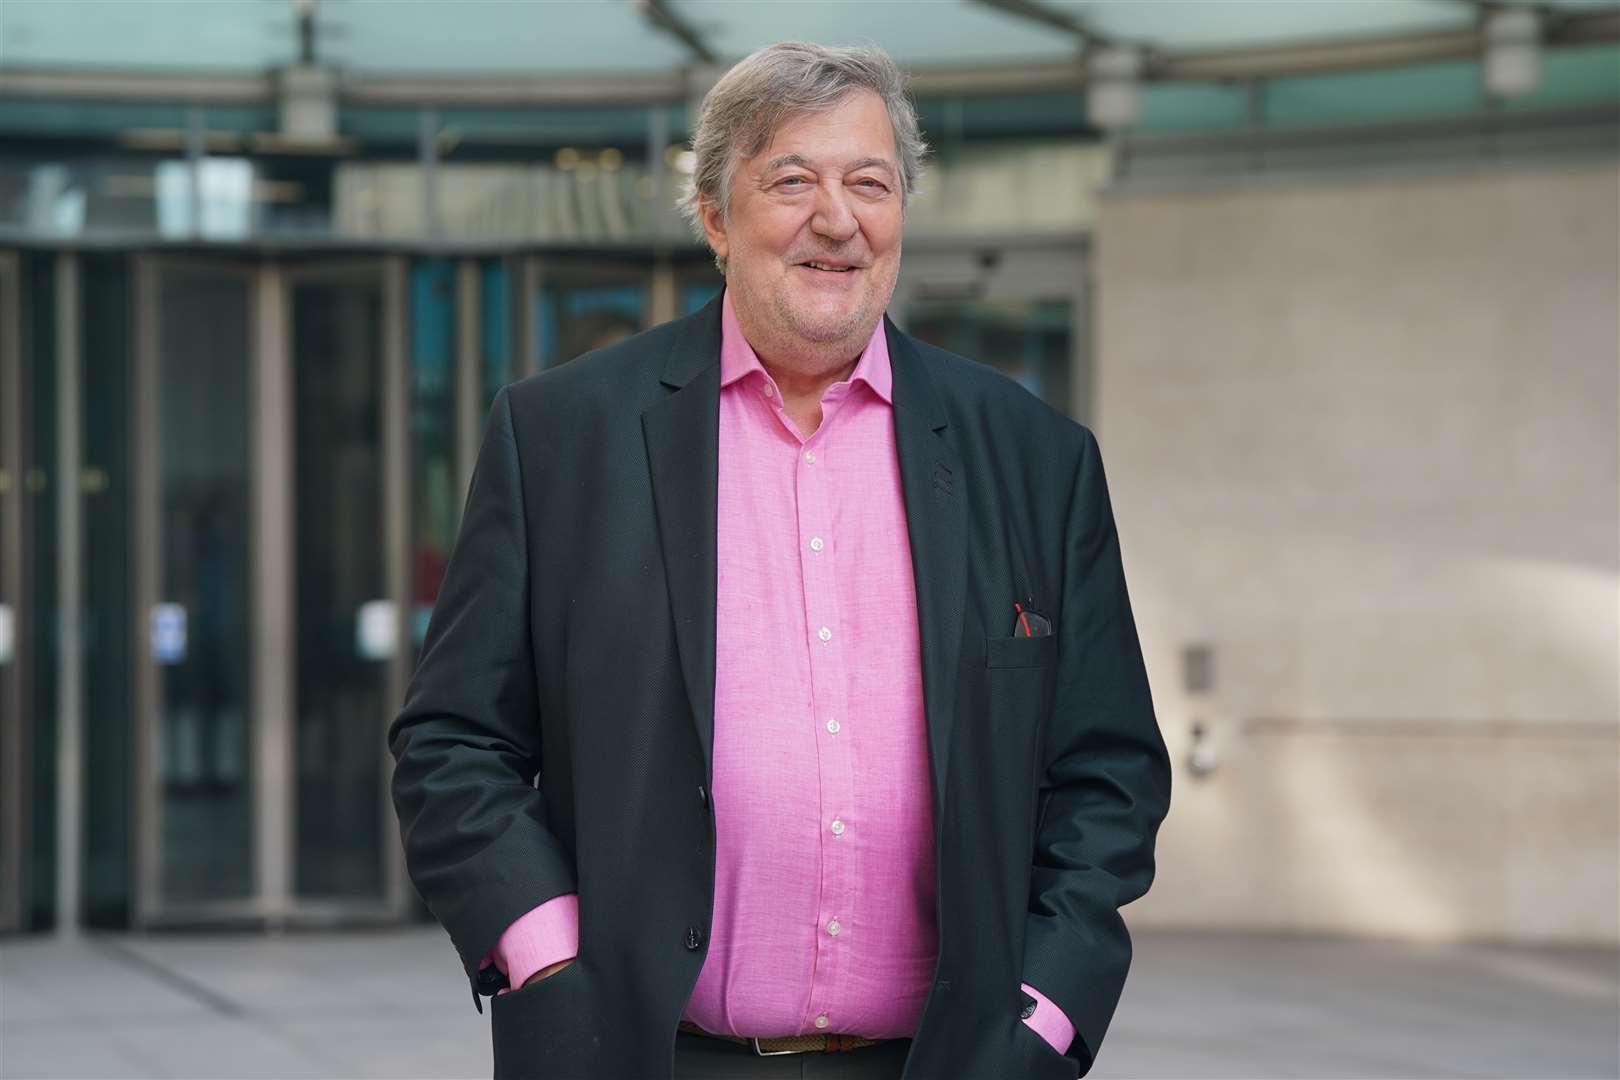 Comedian Stephen Fry outside BBC Broadcasting House in London (Lucy North/PA)